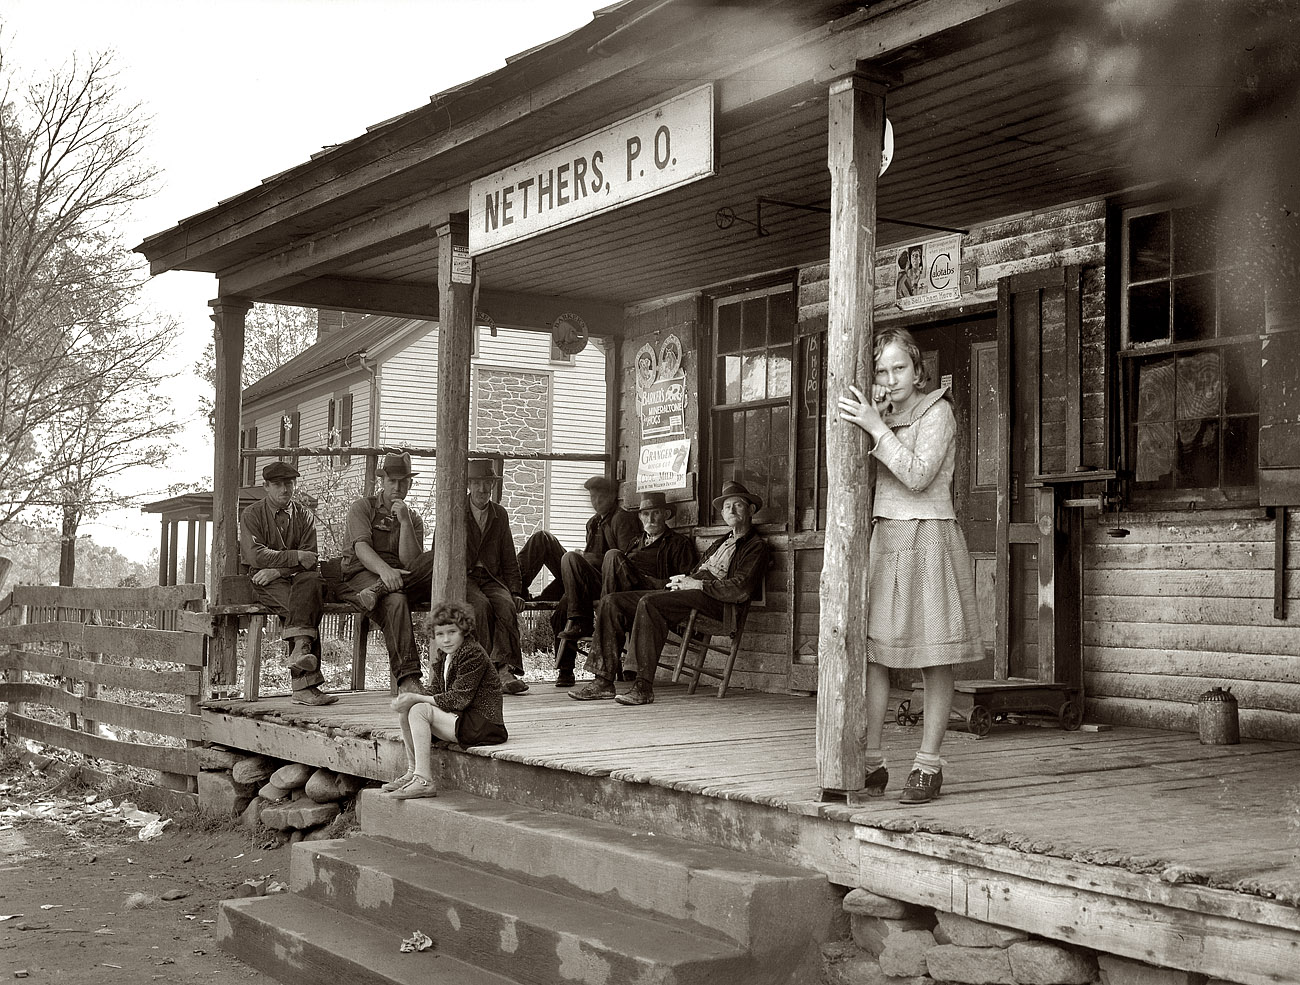 October 1935. The post office at Nethers, Virginia, in Shenandoah National Park. View full size. 35mm nitrate negative by Arthur Rothstein for the FSA.